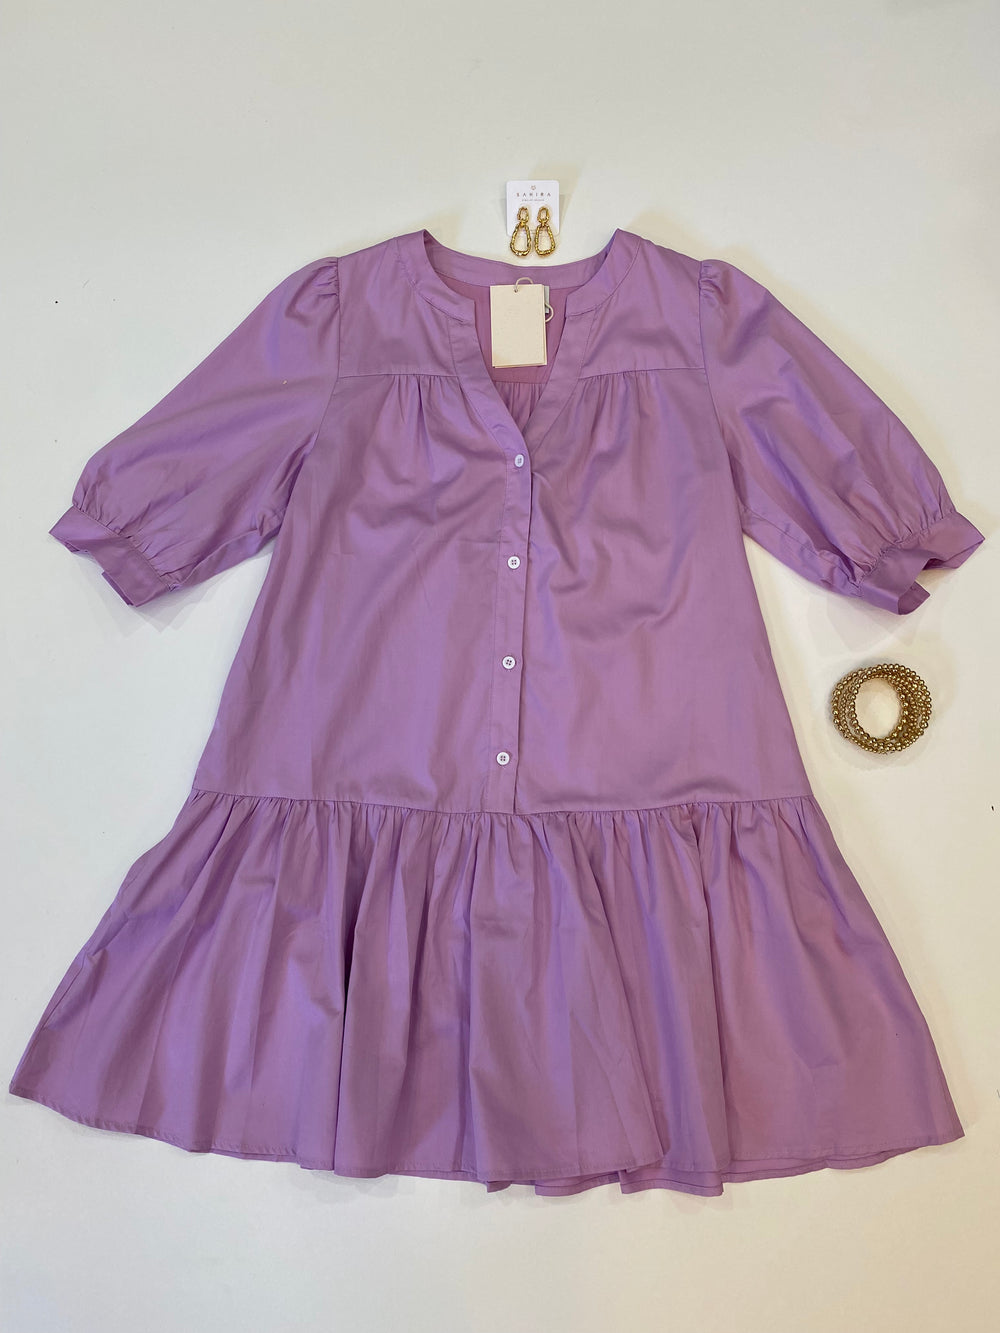 FRNCH - Woven Dress in Lilac